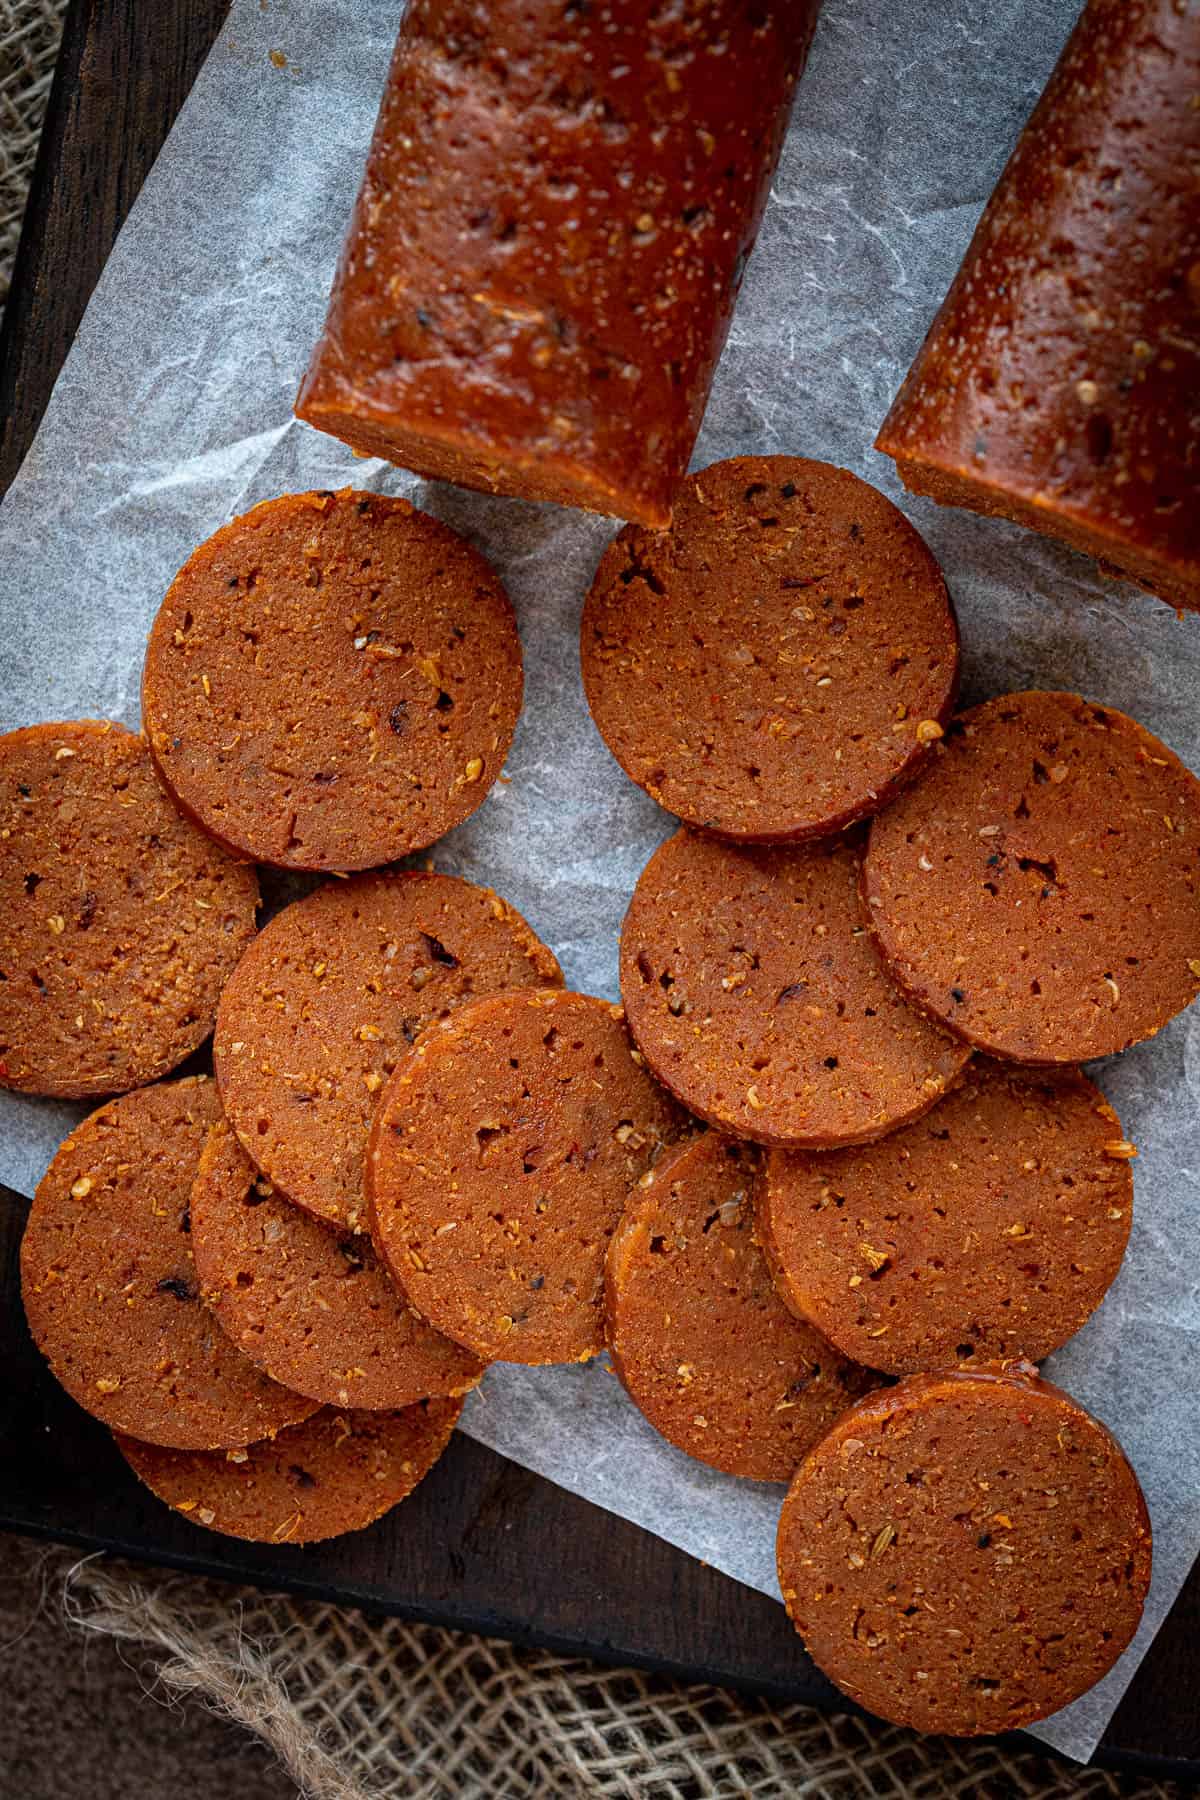 Close up of slices of seitan pepperoni.